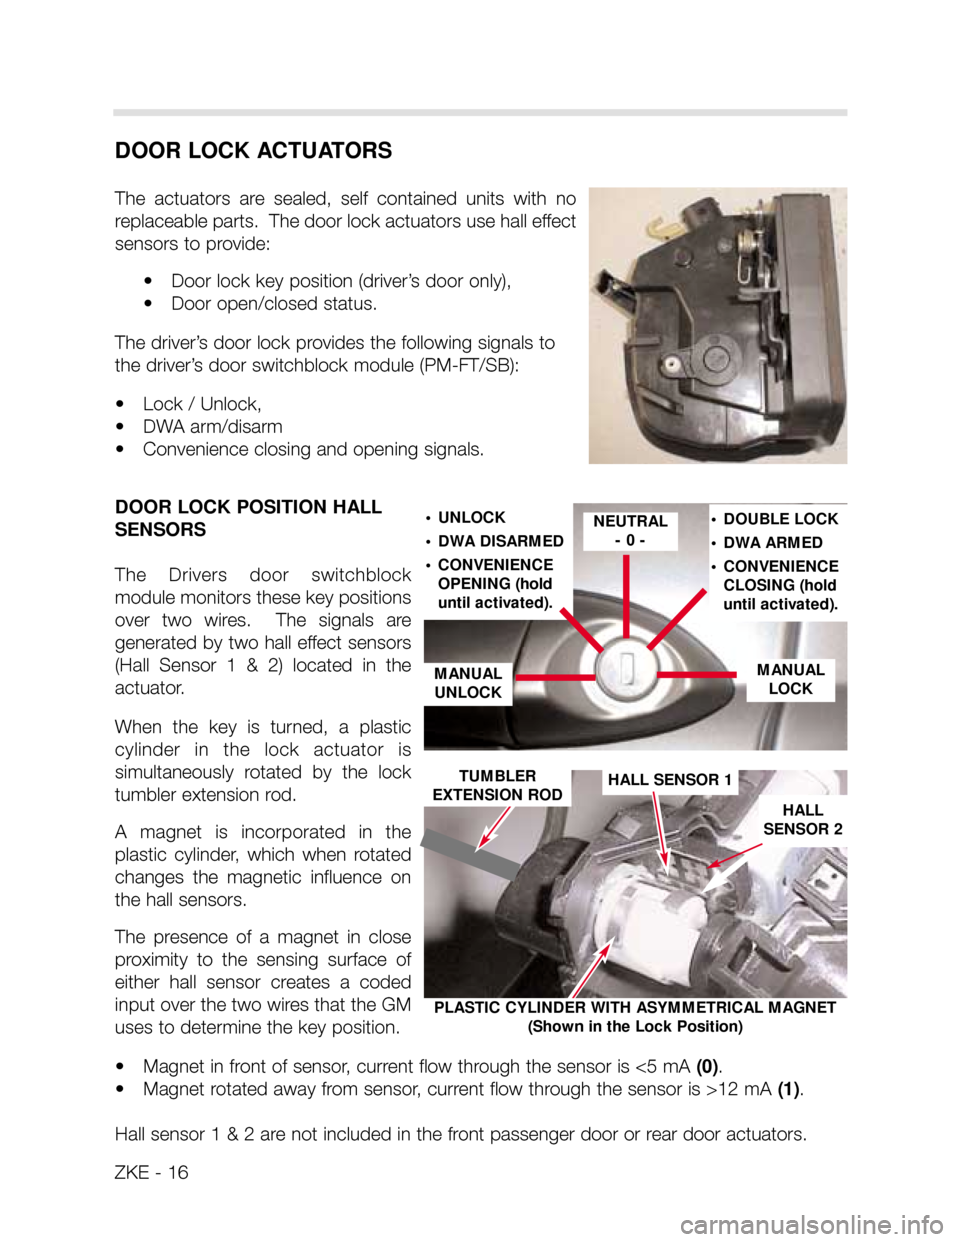 BMW X5 2006 E53 Central Body Electronics Workshop Manual DOOR LOCK ACTUATORS
The  actuators  are  sealed,  self  contained  units  with  no
replaceable parts.  The door lock actuators use hall effect
sensors to provide:
• Door lock key position (driver’